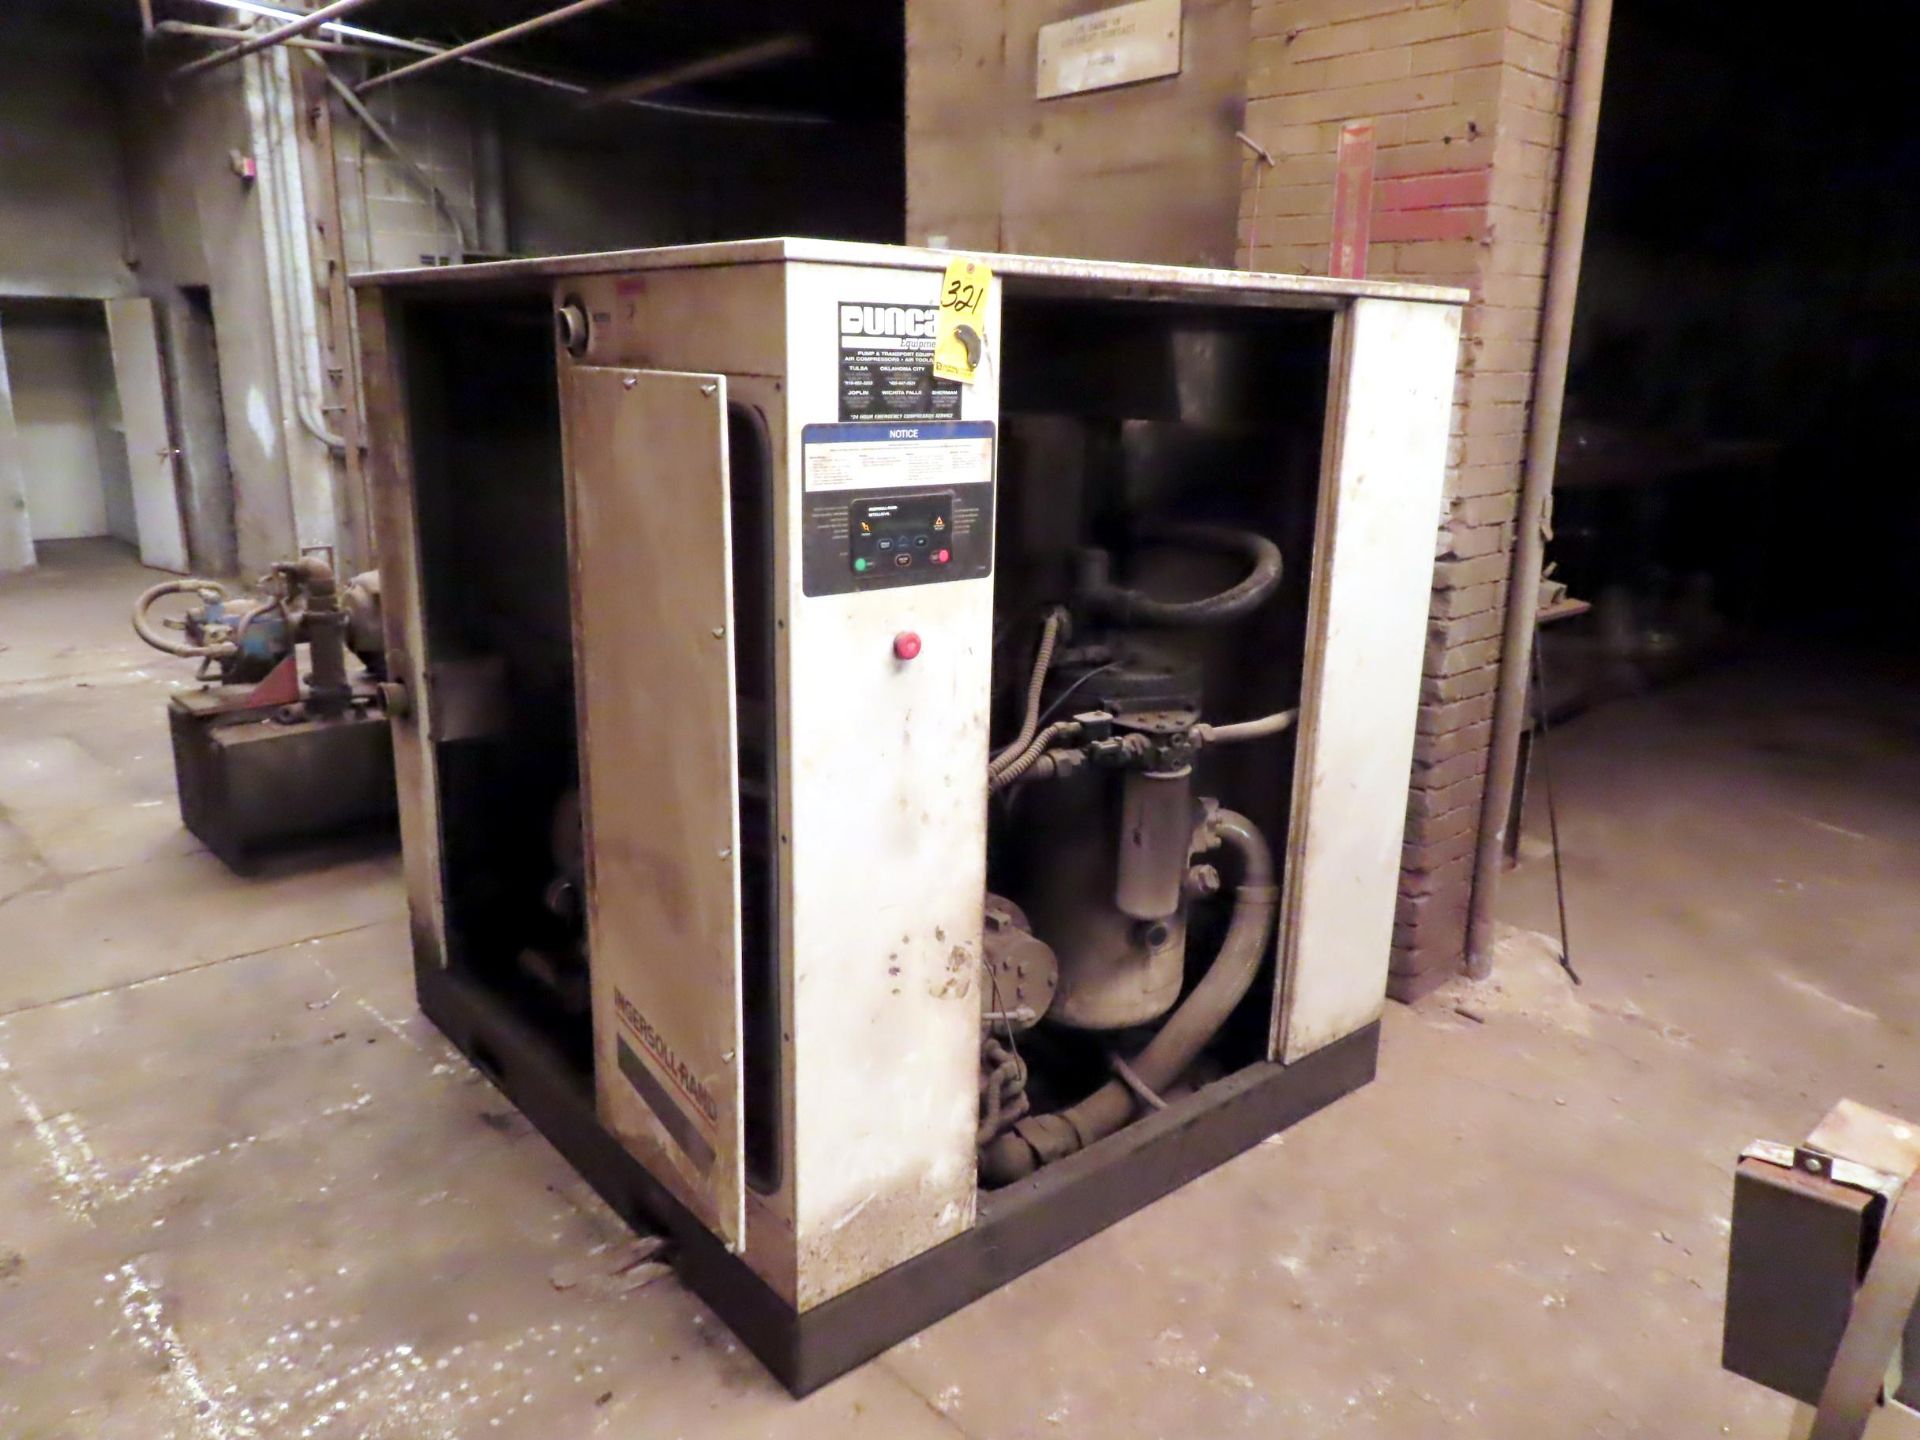 INGERSOLL RAND ROTARY SCREW AIR COMPRESSOR, M# SSR-EP100, 100 HP, 446 CFM (OPERATING CONDITION UNKNO